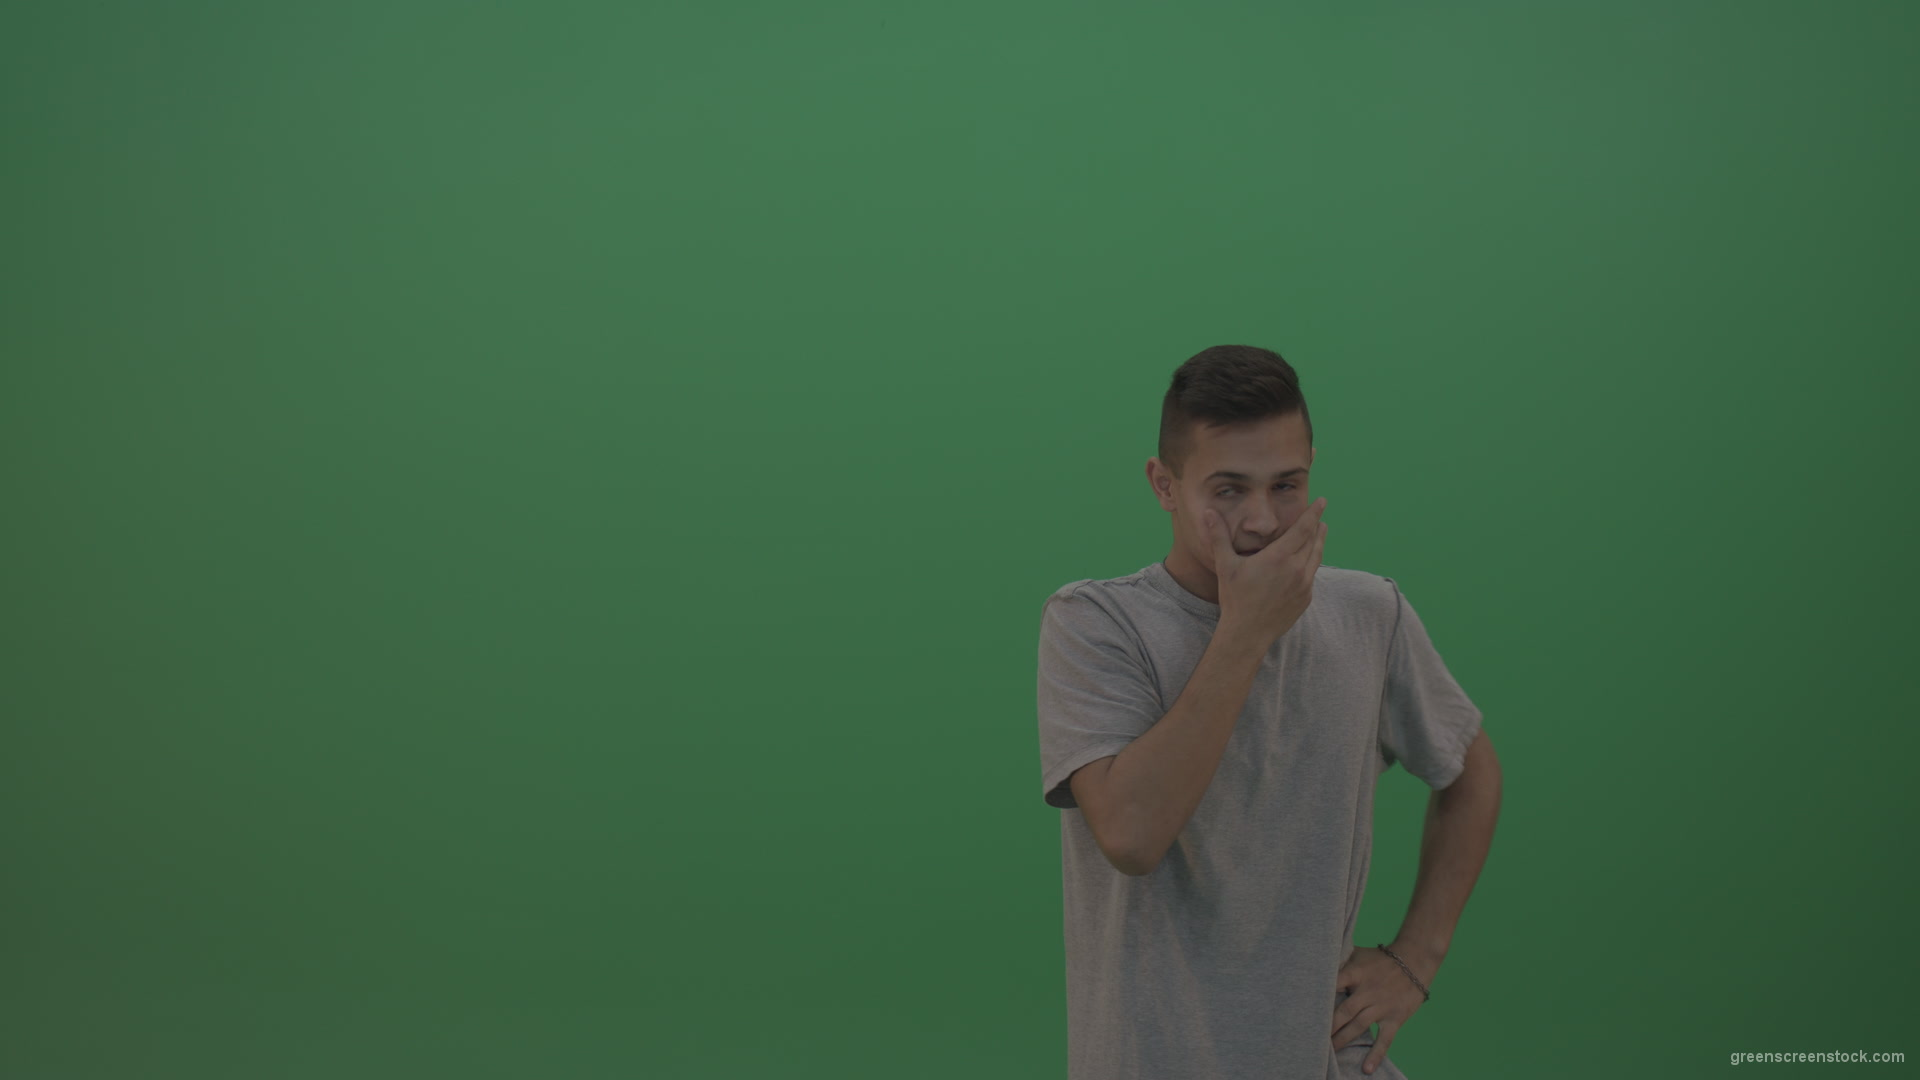 Boy-in-grey-wear-expresses-disappointment-over-green-screen-background_007 Green Screen Stock